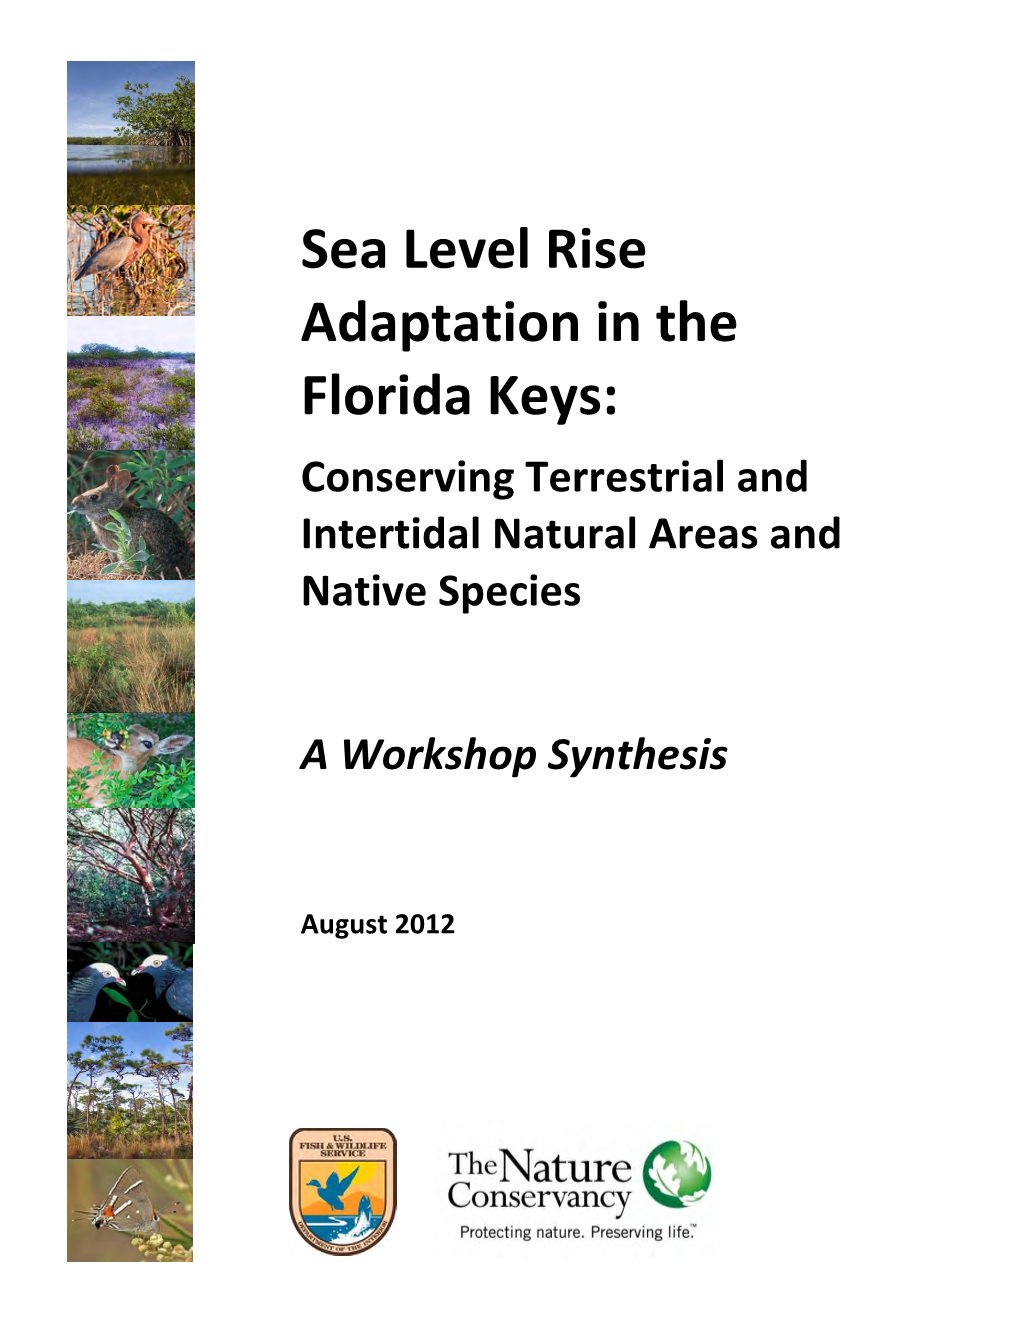 Sea Level Rise Adaptation in the Florida Keys: Conserving Terrestrial and Intertidal Natural Areas and Native Species